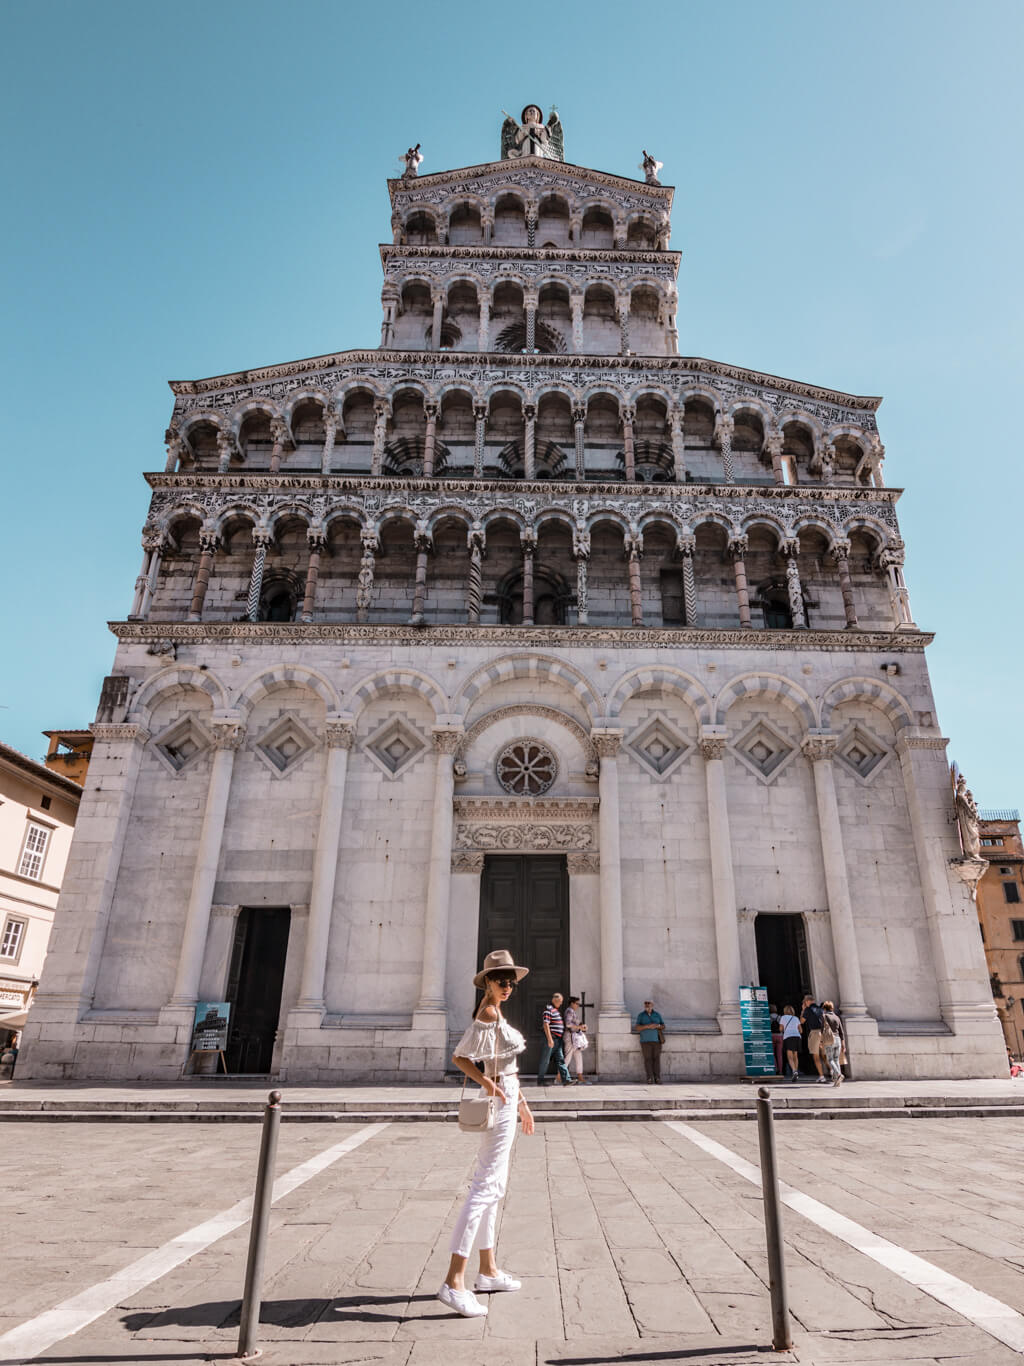 Lucca || A Guide For Planning A Trip To Tuscany, Italy - Things to do, including food & restaurants tips, wineries, and road trip tips